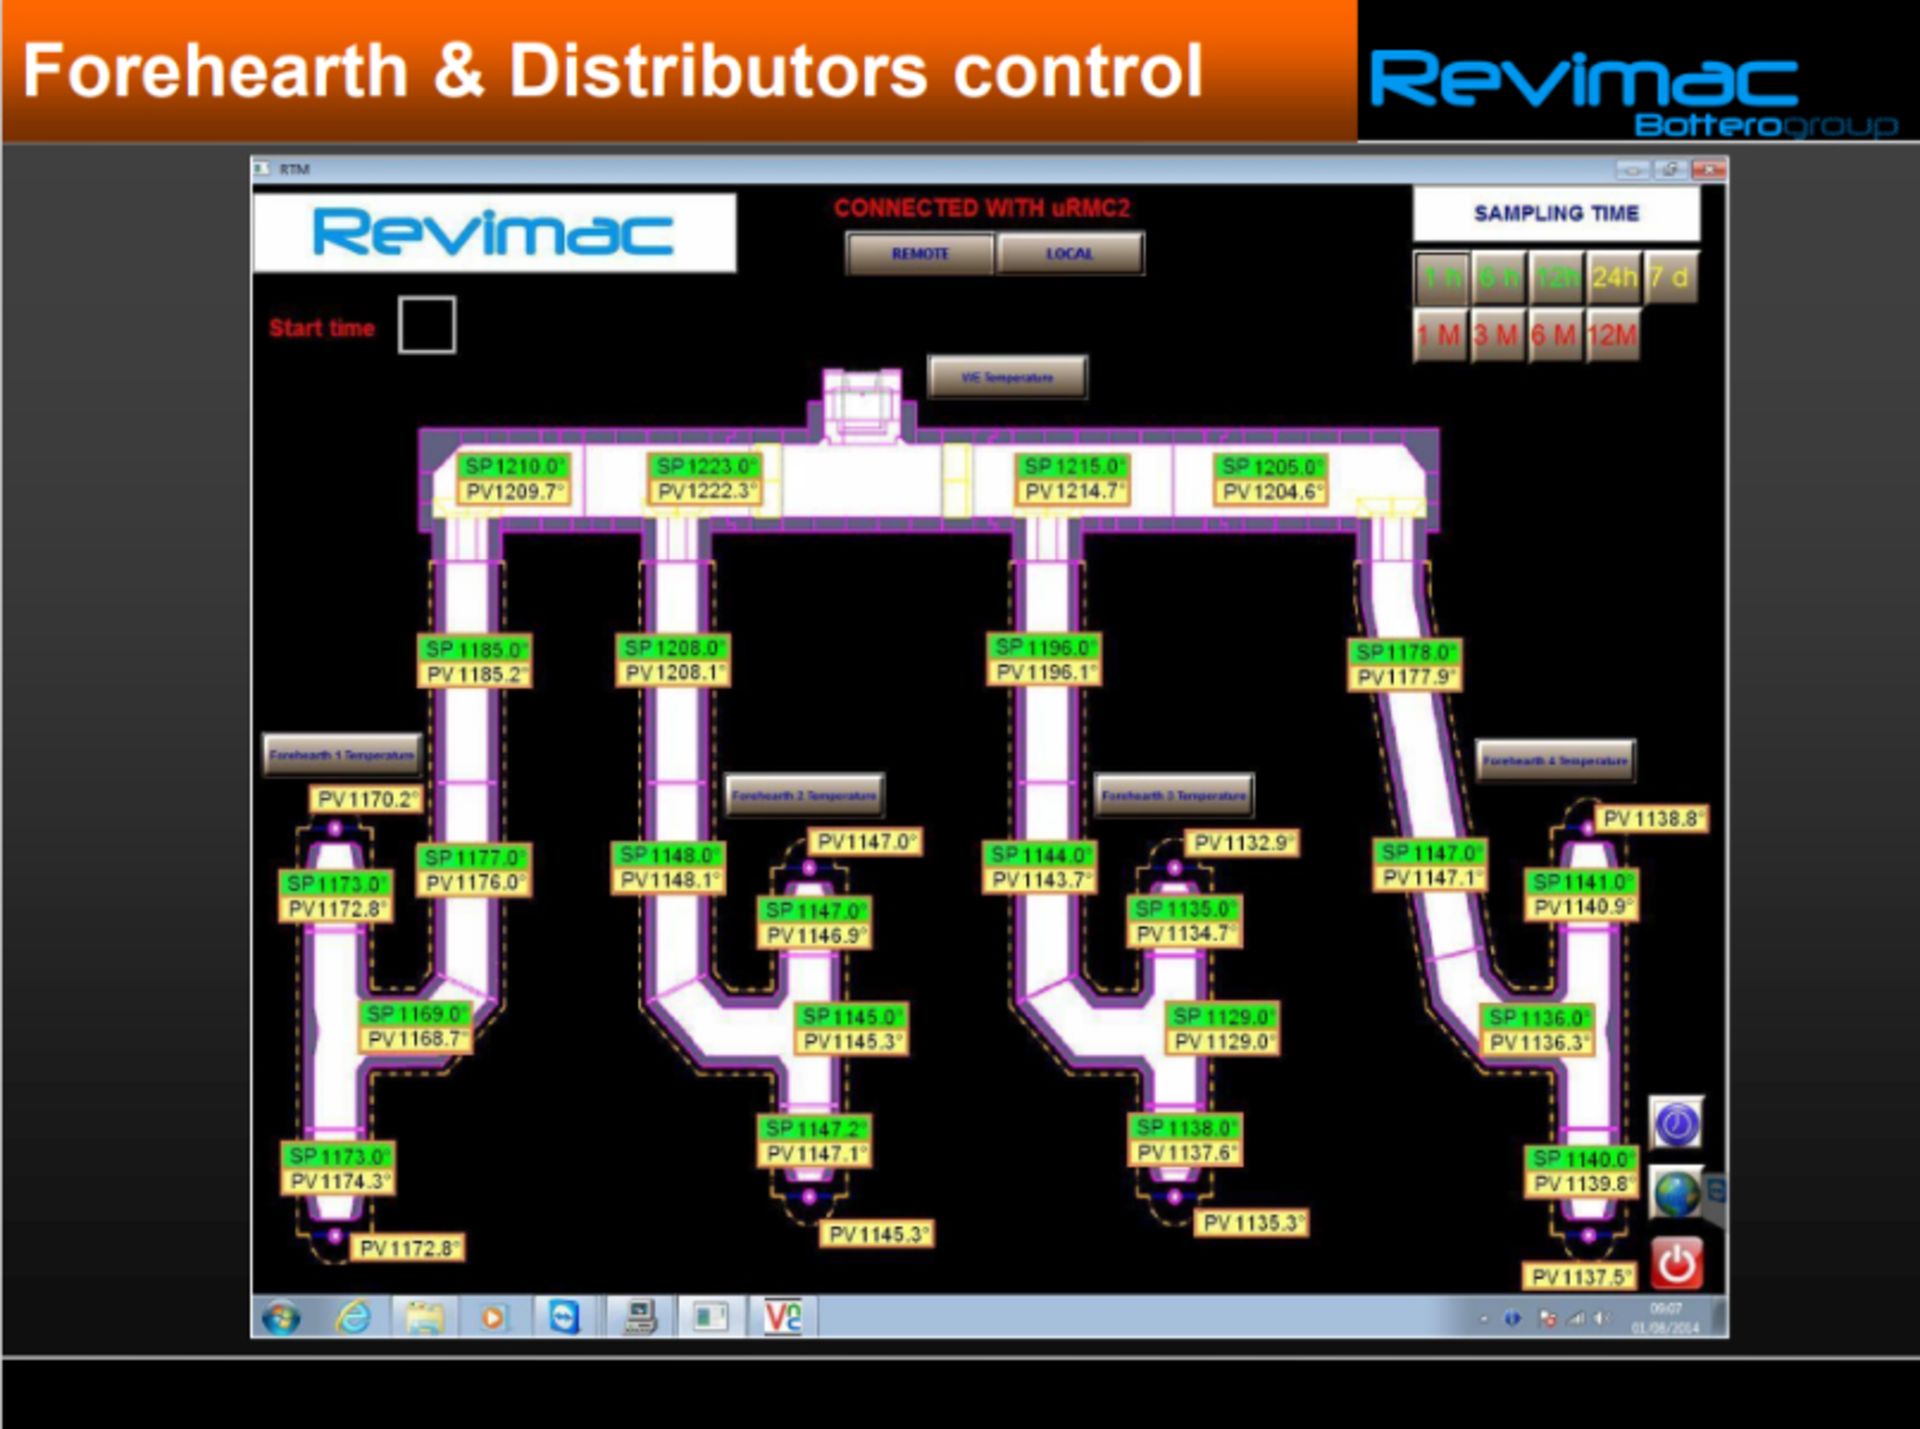 Revimac Forehearth Control System *Subject to Confirmation* - Image 7 of 18